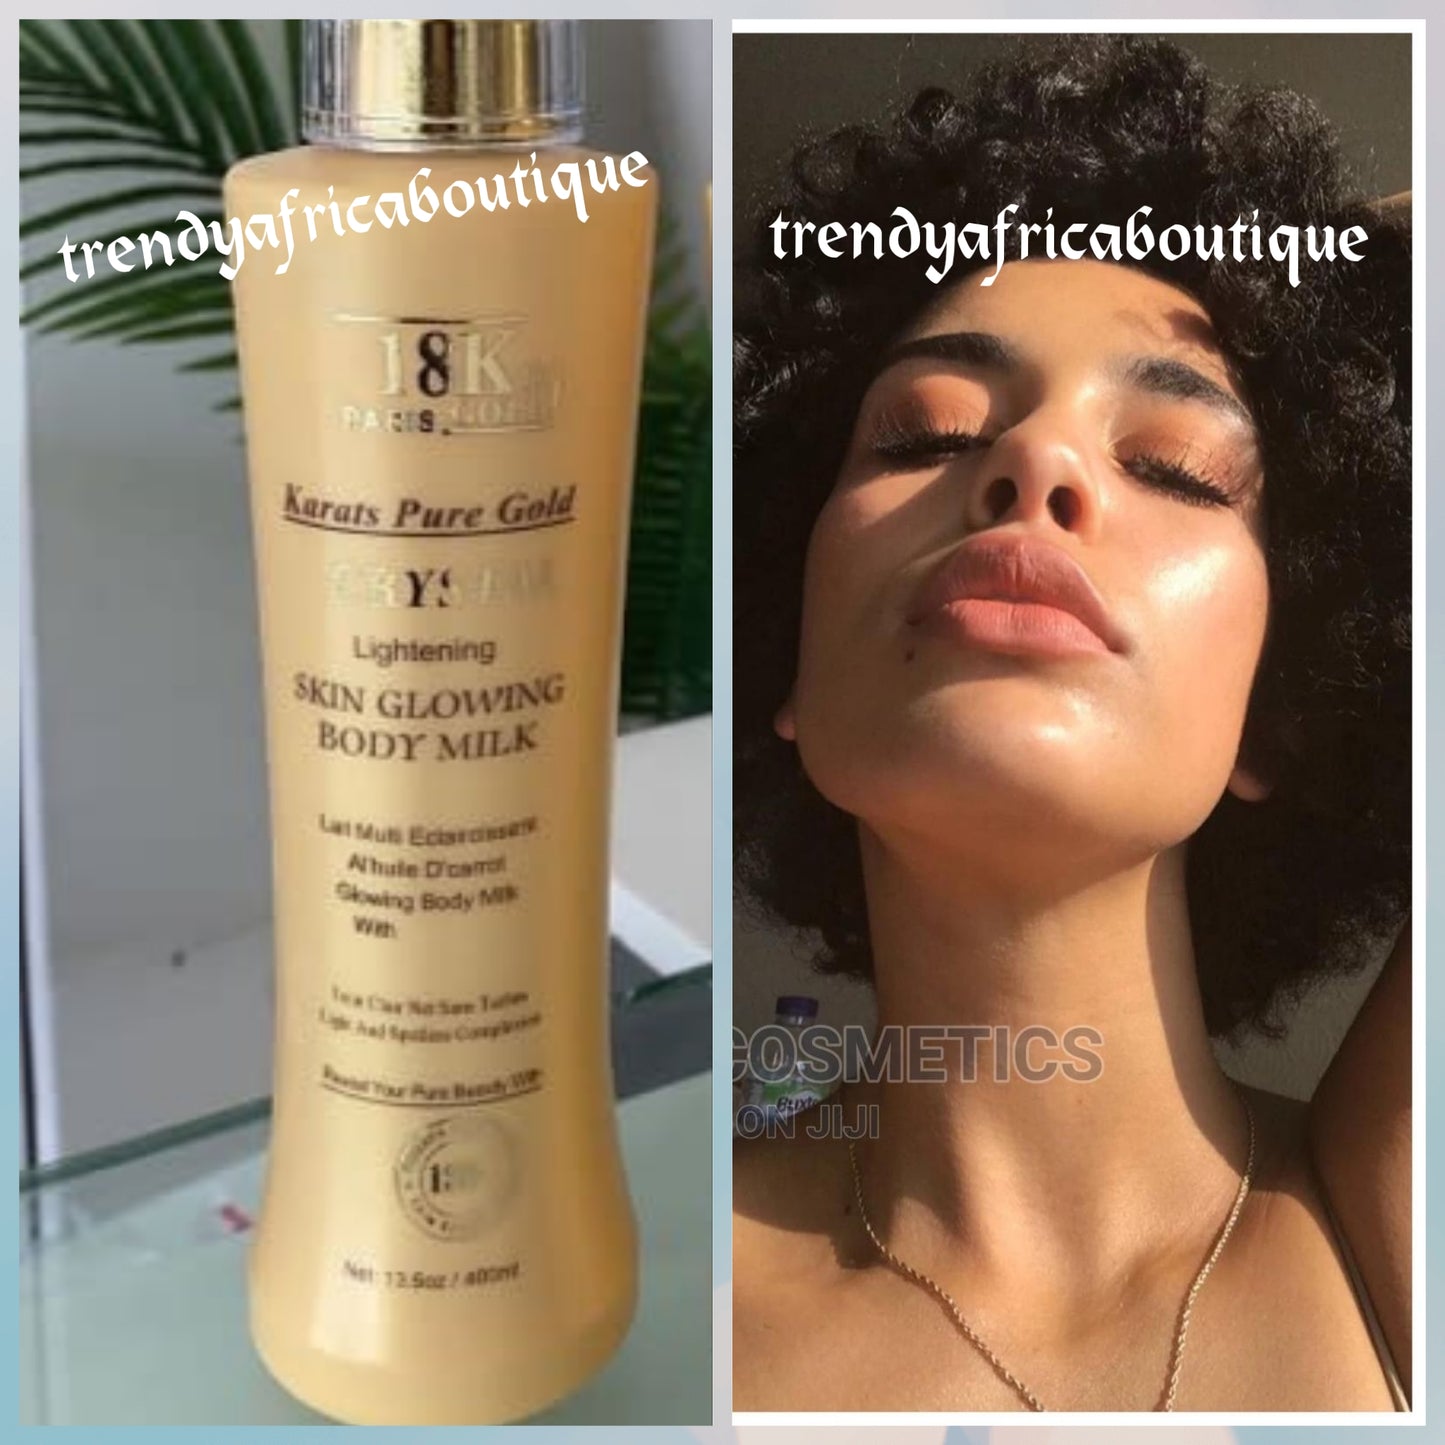 18k paris gold crystal lightening & skin glowing body milk. Clears pregnancy discoloration fast super. Formulated with vitamins for a caramel skin 400mlx1